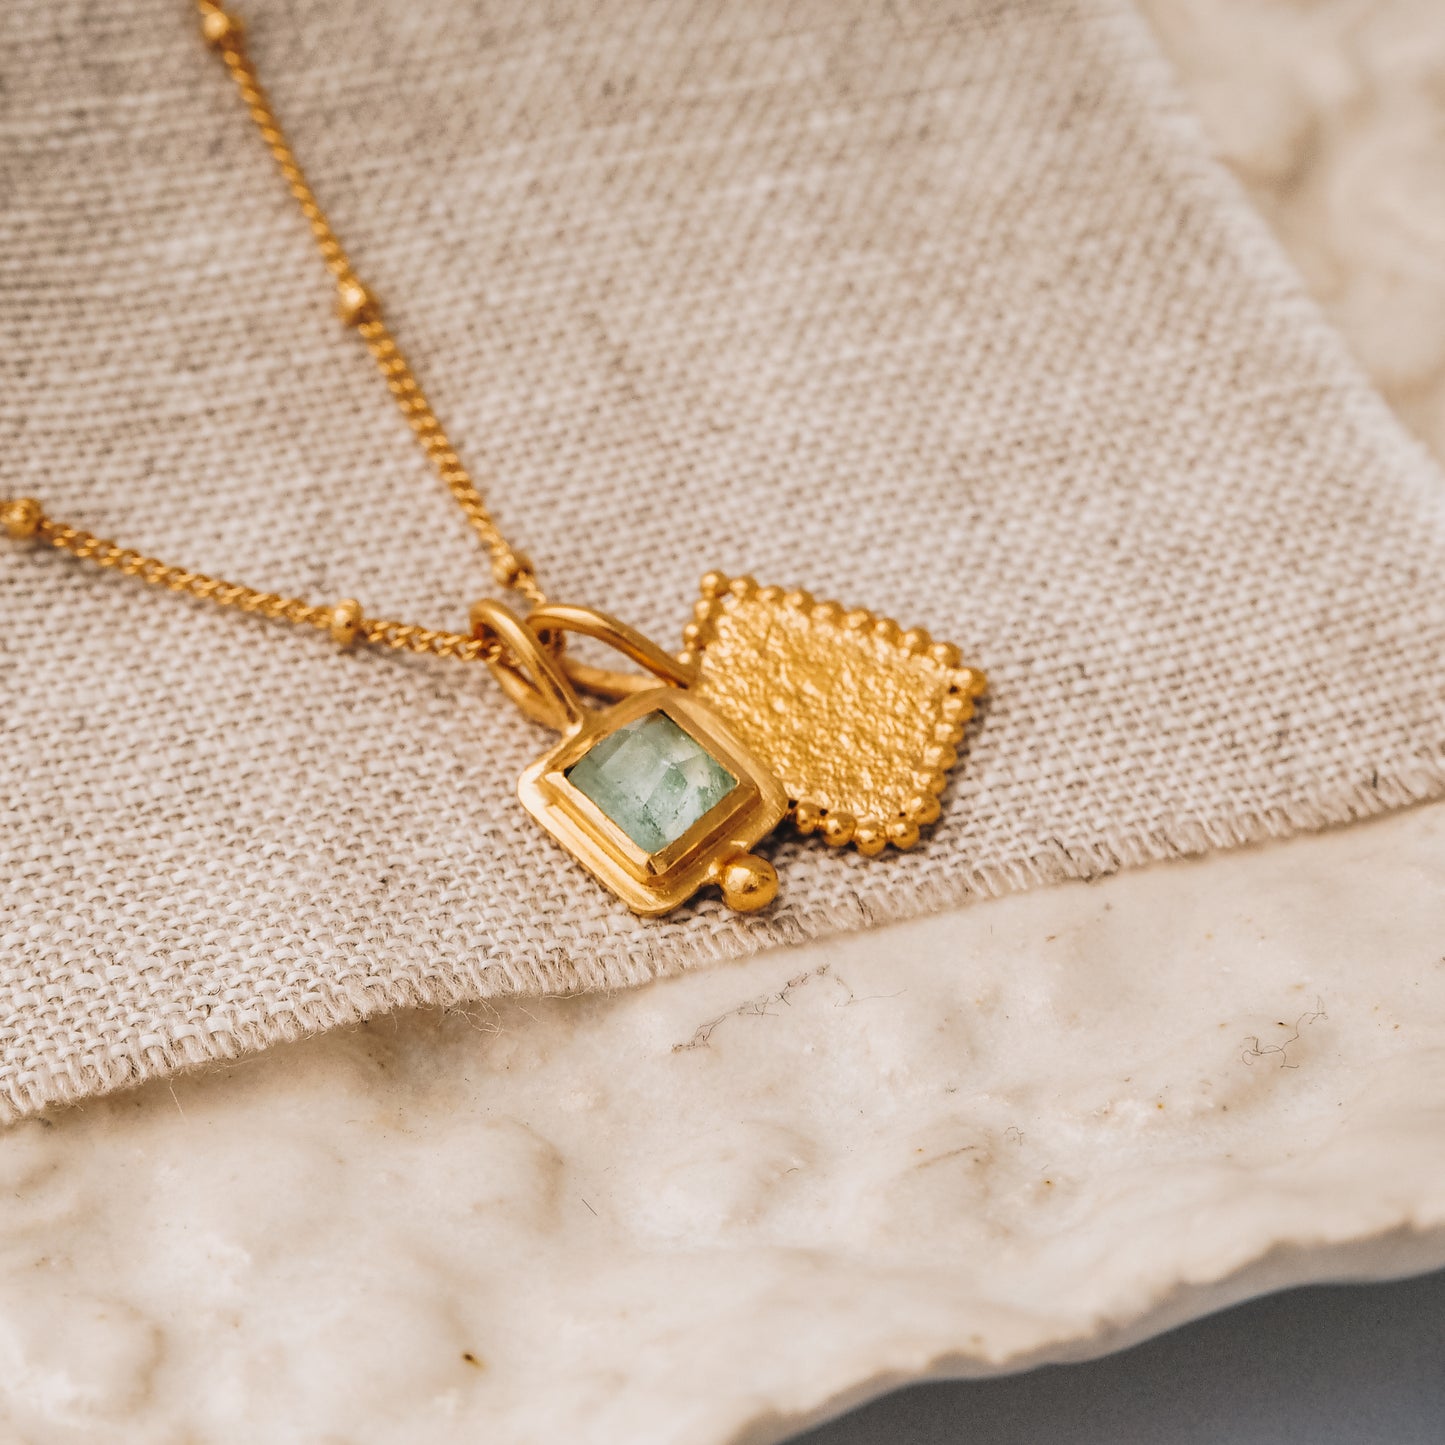 Handcrafted square gold pendant featuring a captivating blue rose cut tourmaline gemstone and meticulous granulation work, elegantly suspended from a satellite chain.